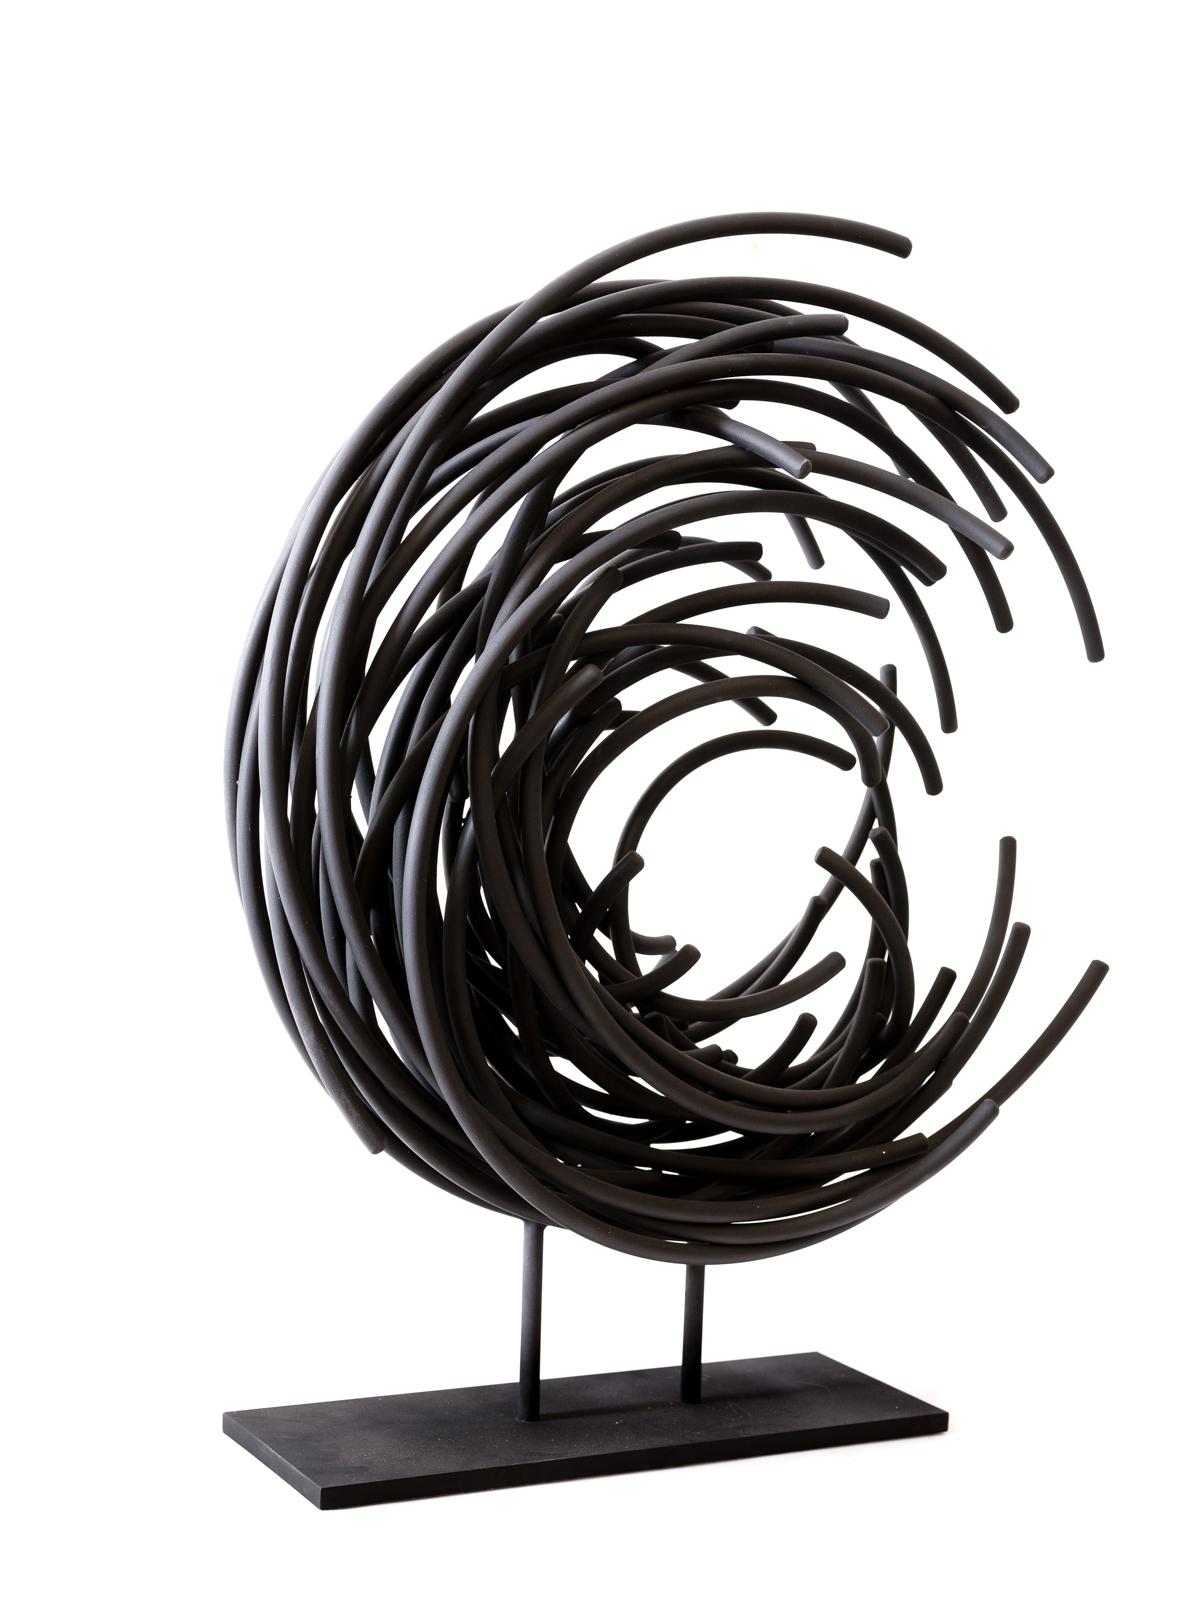 Maelstrom Series No 4 - layered, intersecting, forged aluminum sculpture For Sale 3